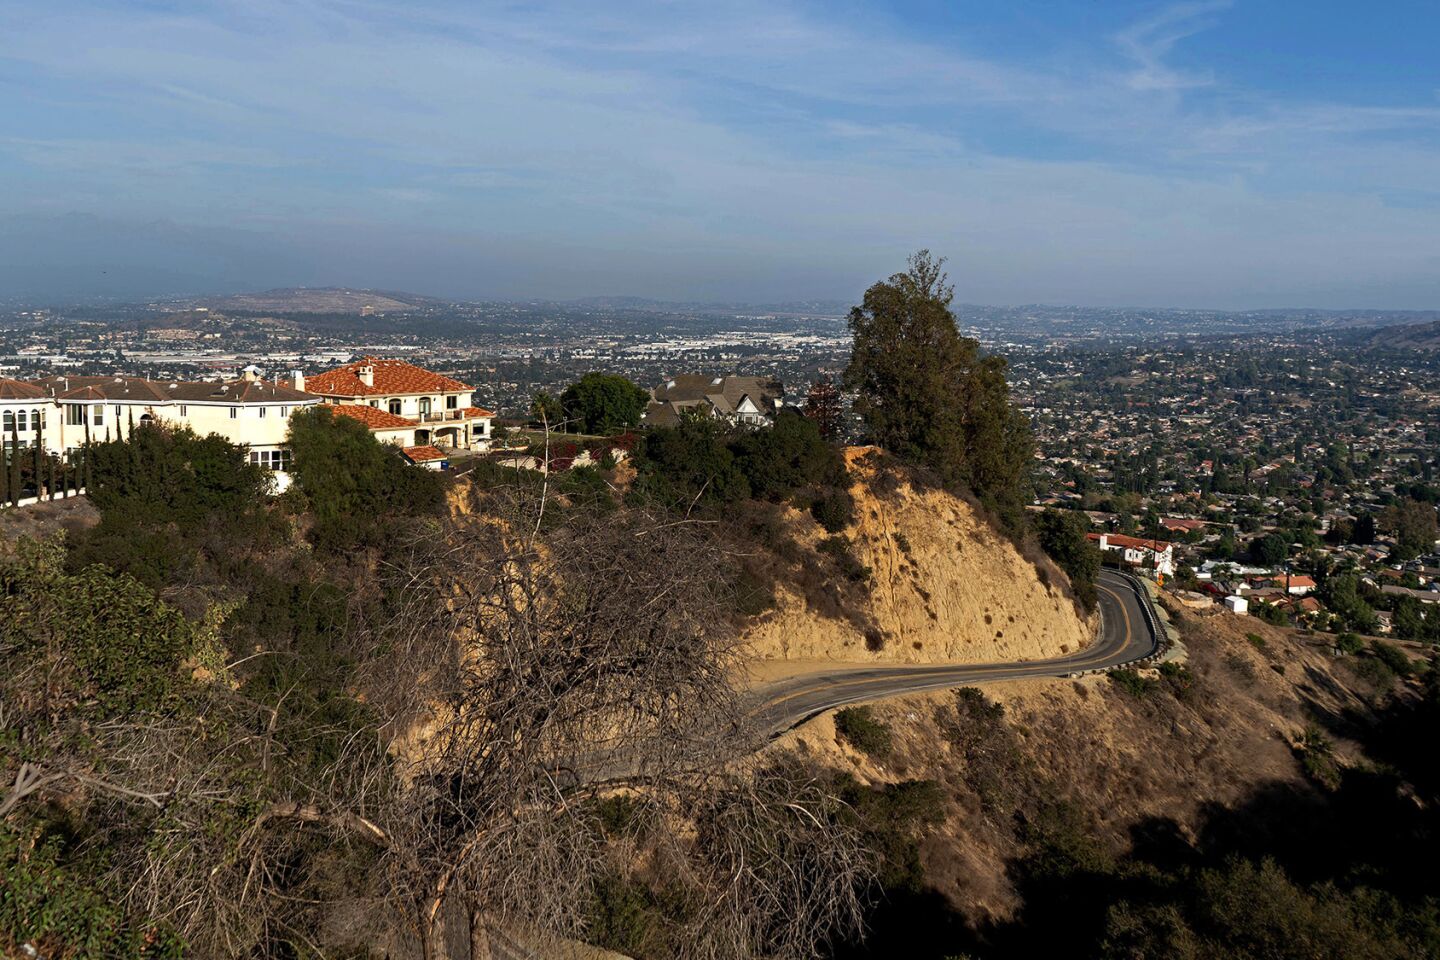 Neighborhood Spotlight: Hacienda Heights' suburban living sprouted where orchards once grew